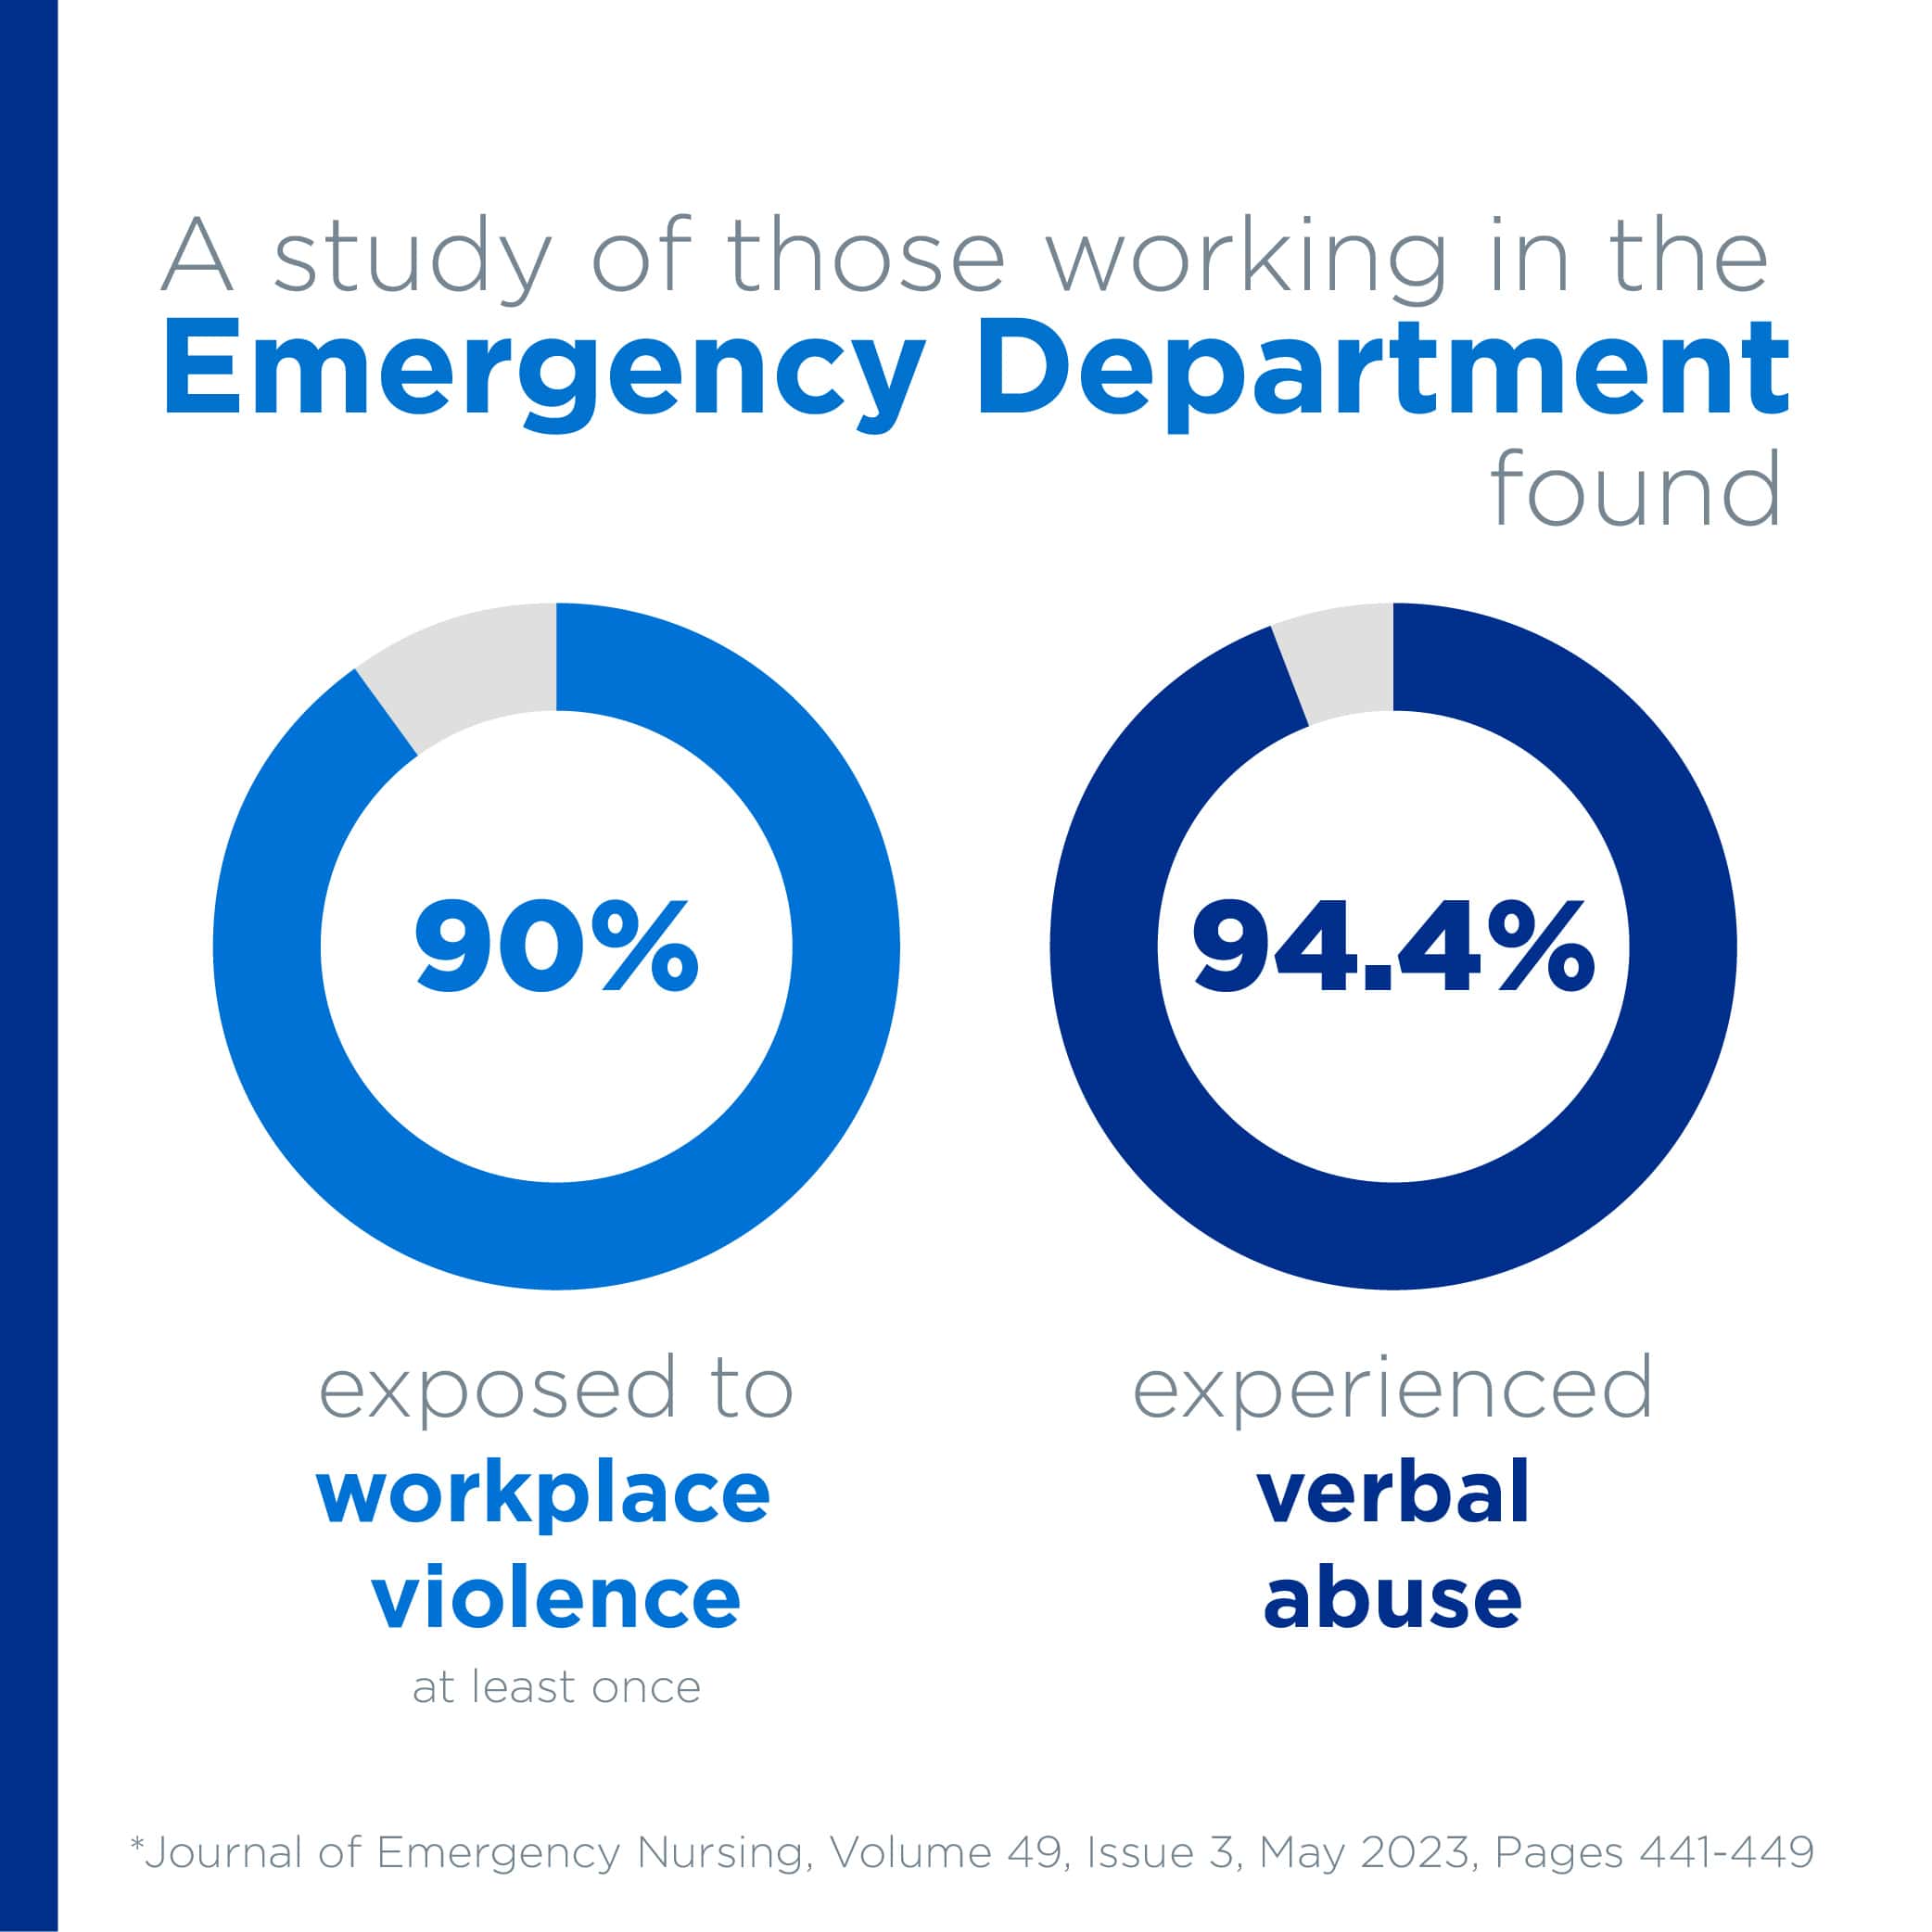 workplace violence verbal abuse healthcare